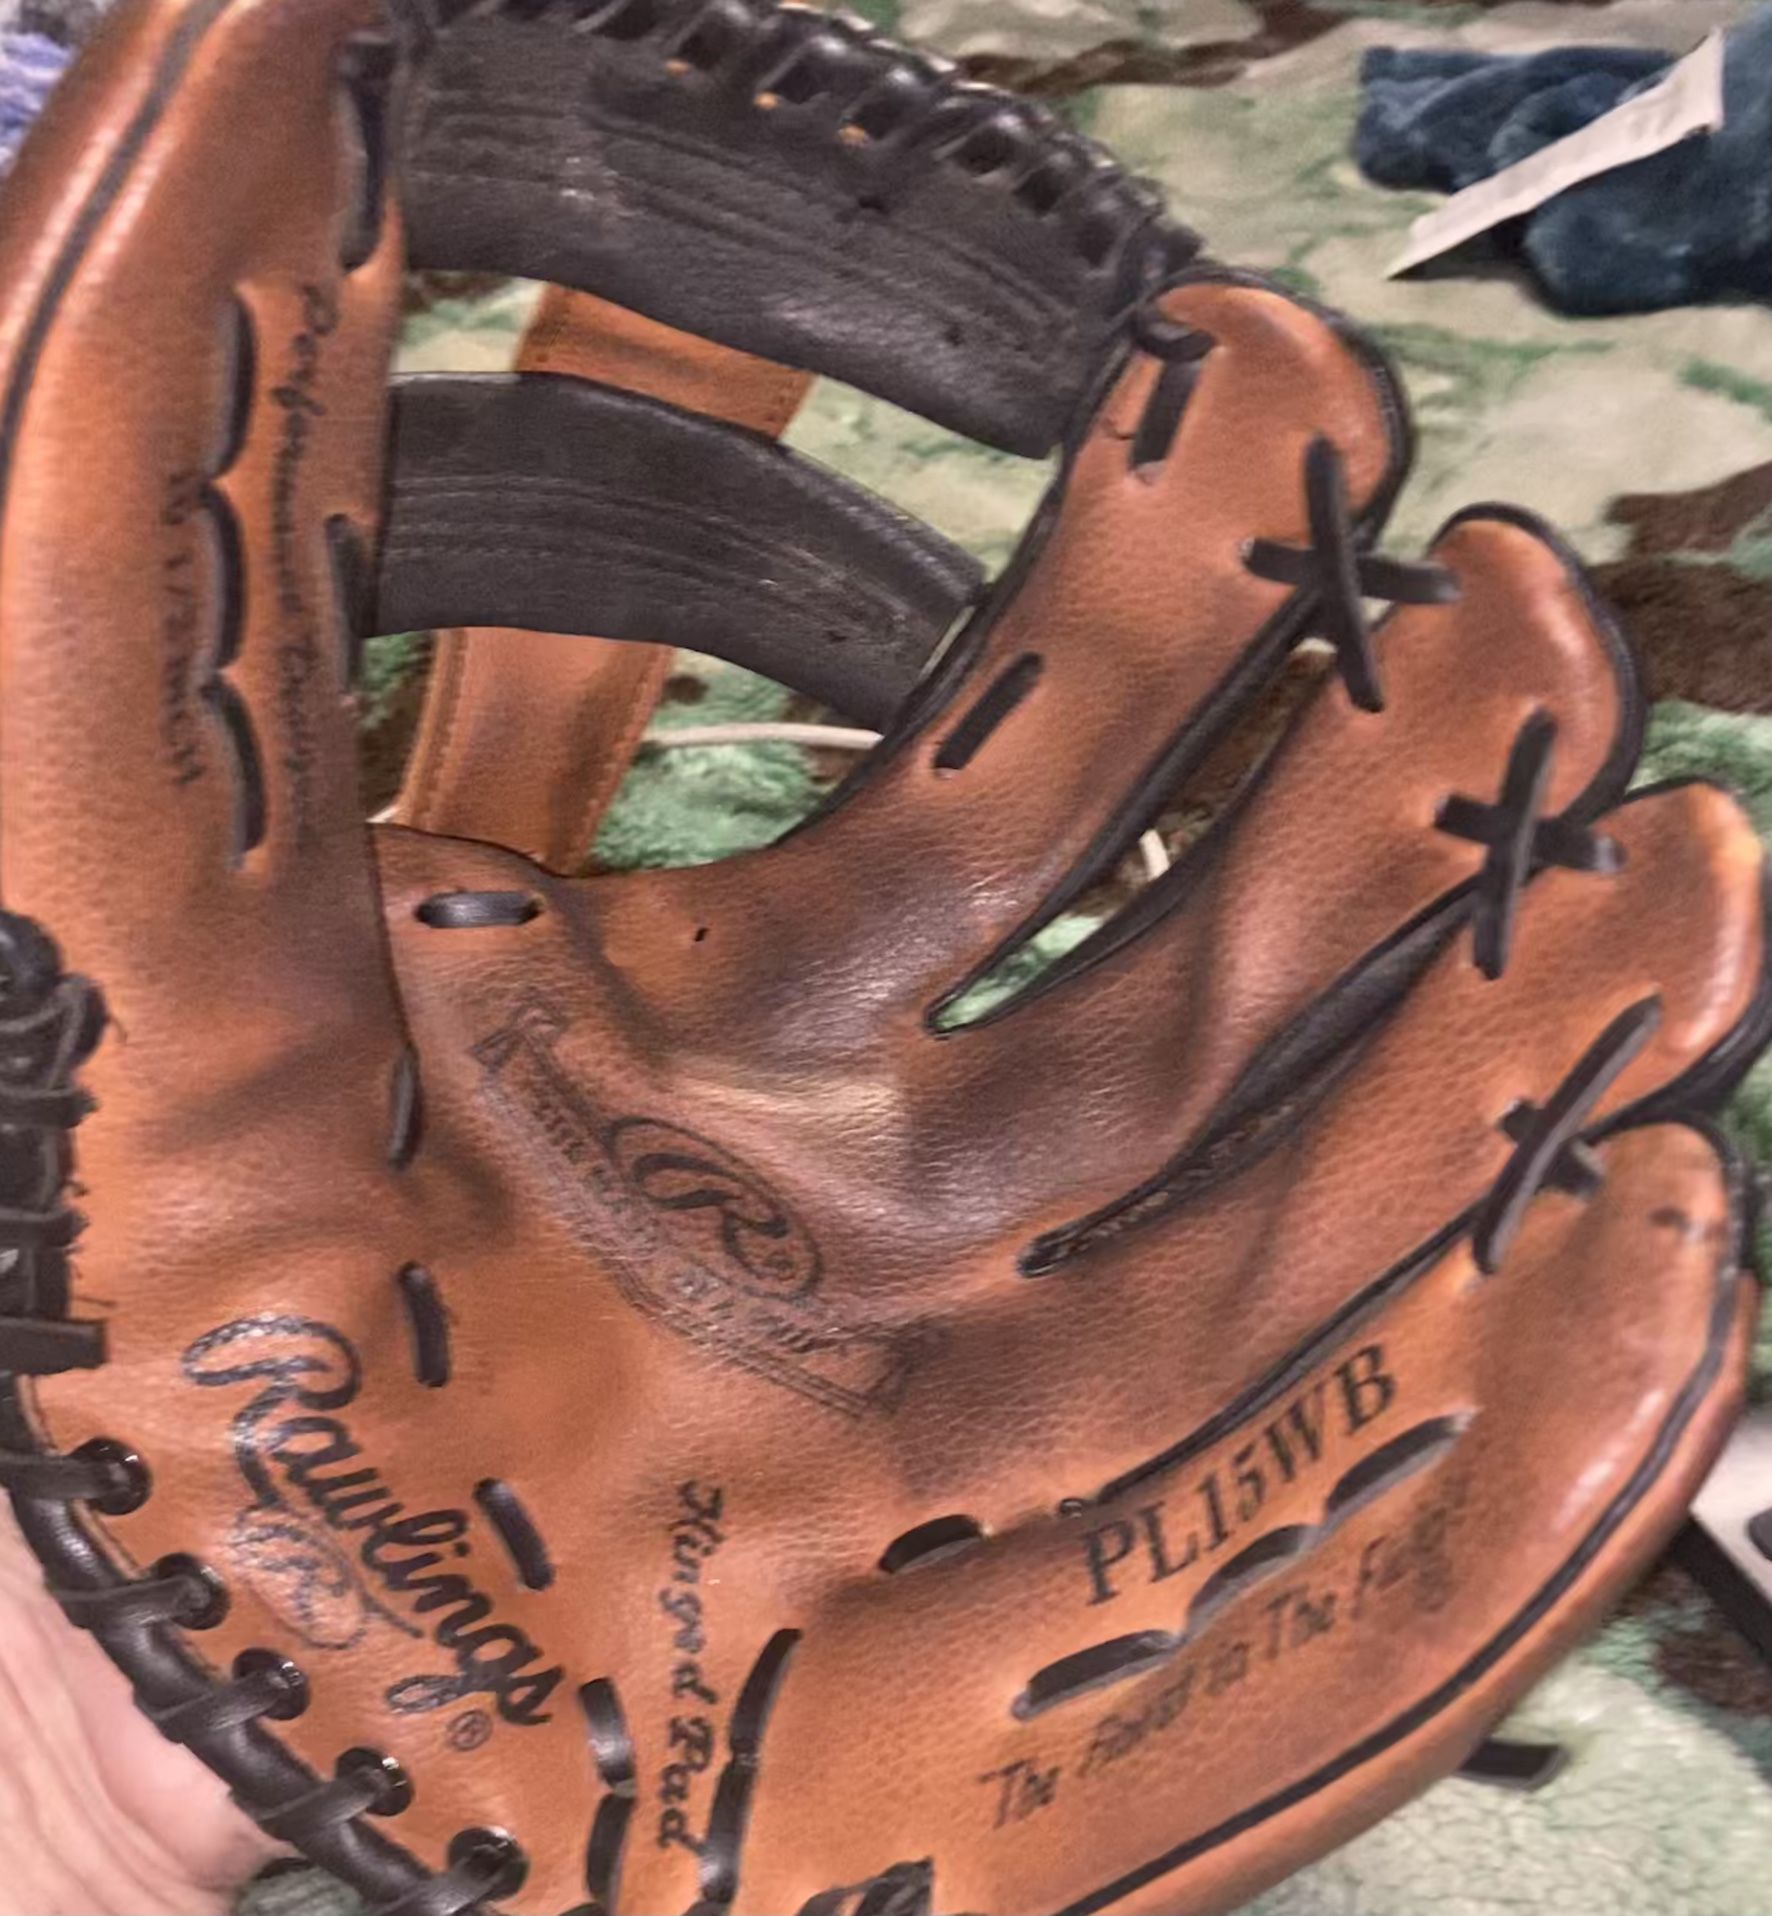 Gently used Rawlings PL15WB Baseball Glove 10 1/2” Genuine Leather Mitt Players Series RHT in great 